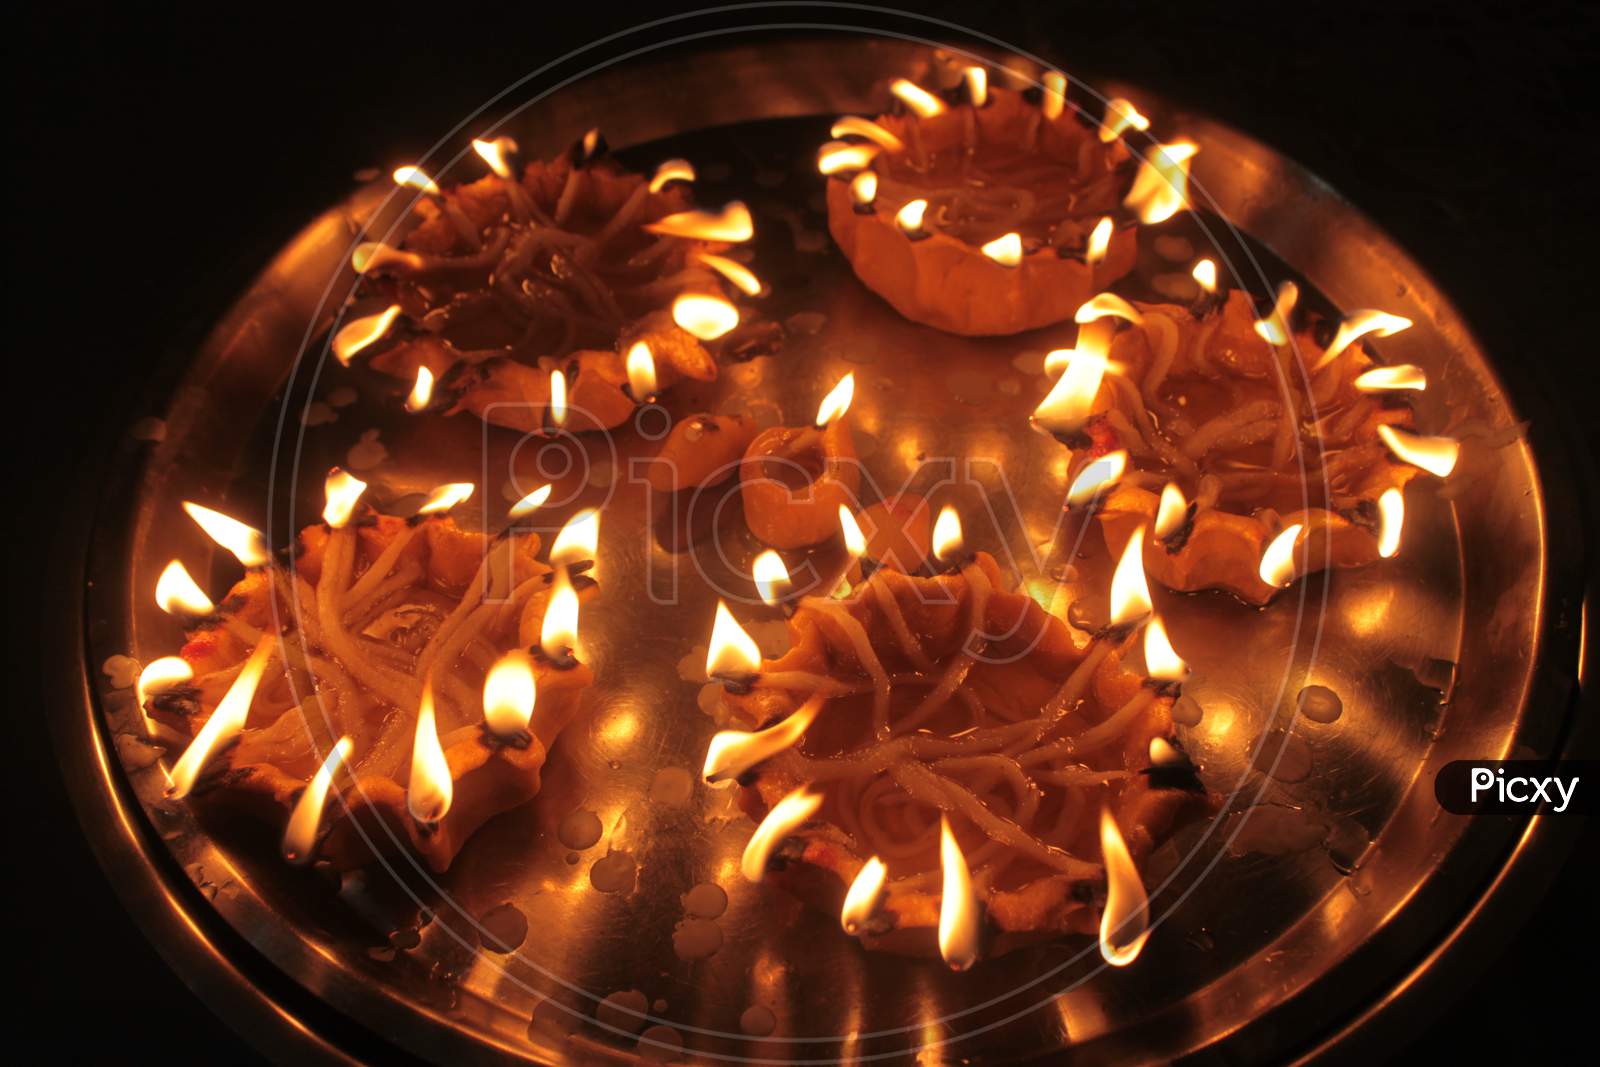 Holy Lamps For Religious Rituals In India Arranged In A Copper Plate